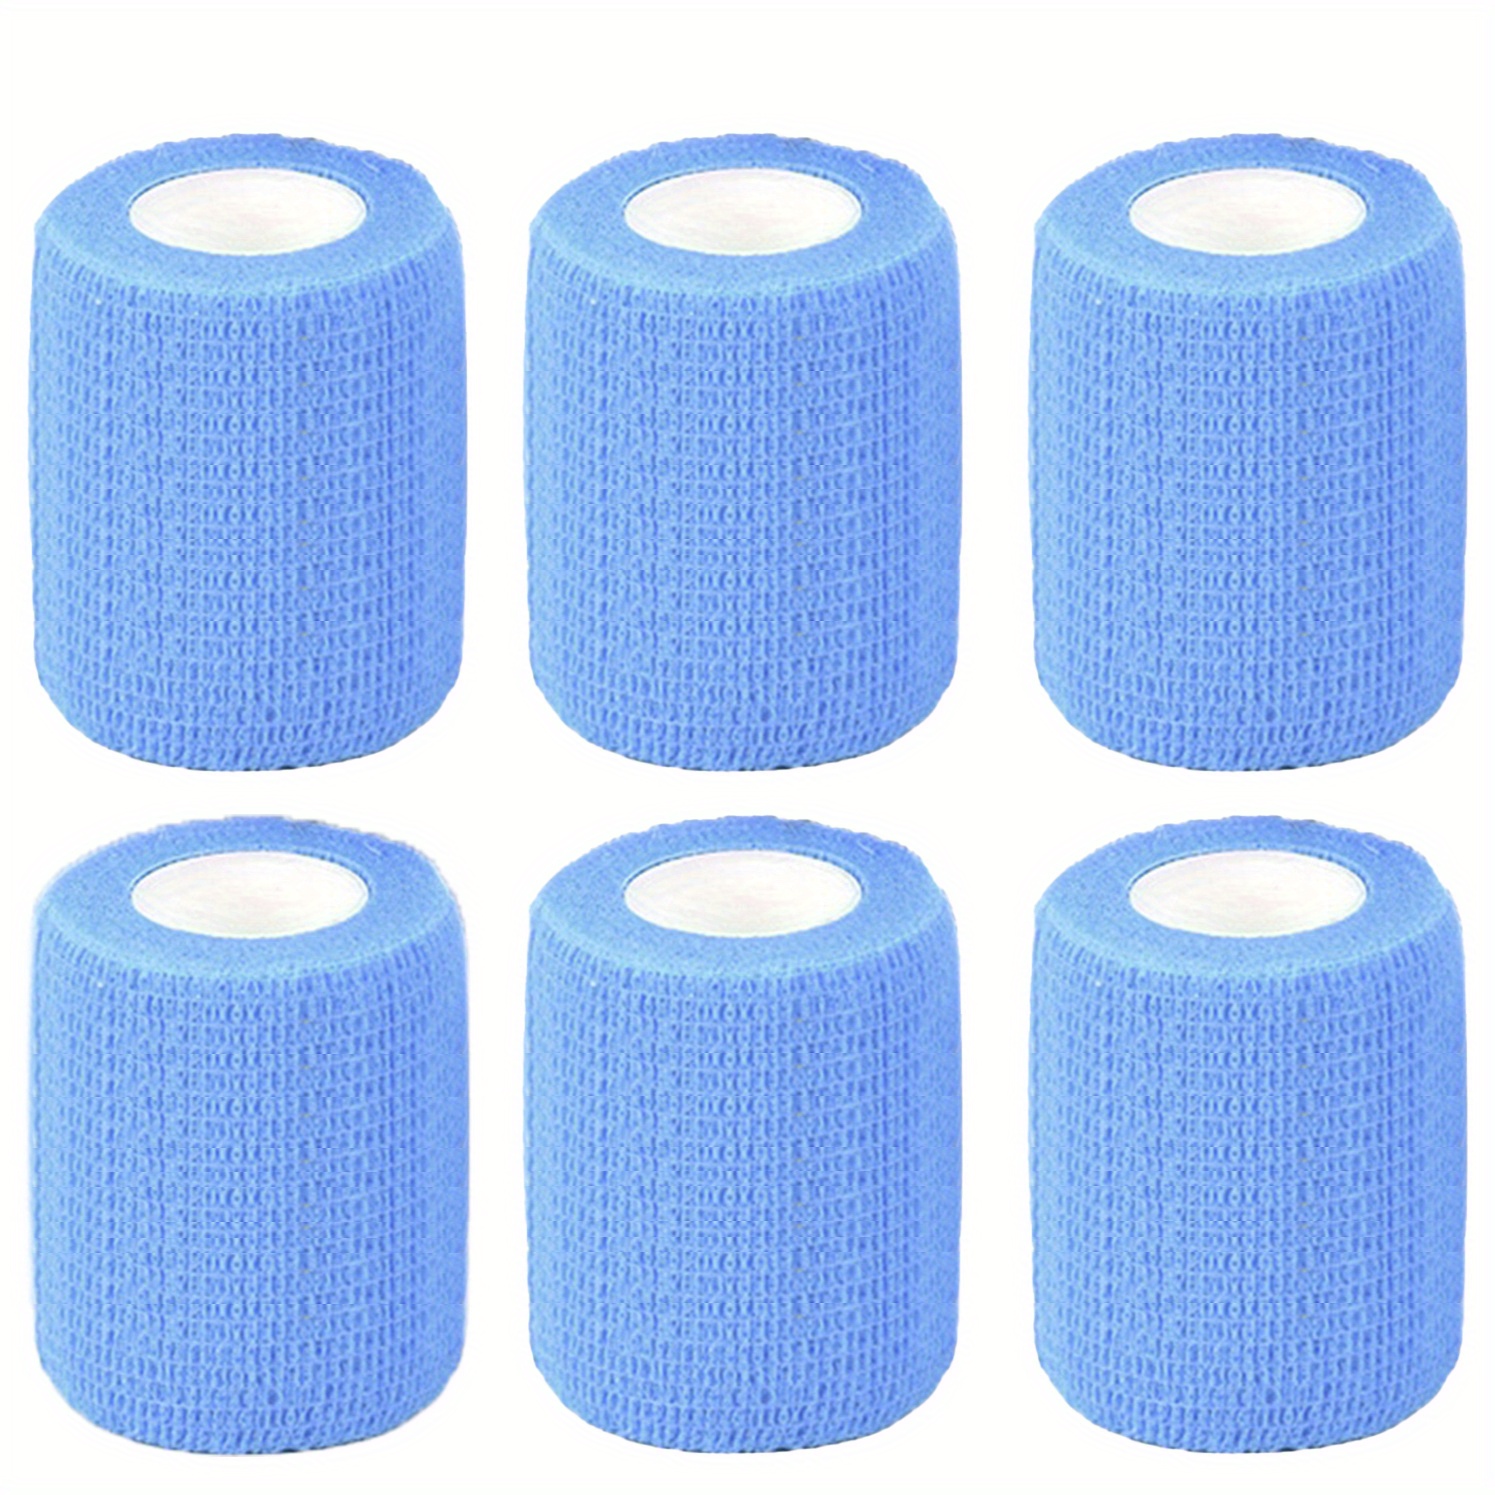 Buy White Color Self Adhesive Elastic Tape at Best Prices